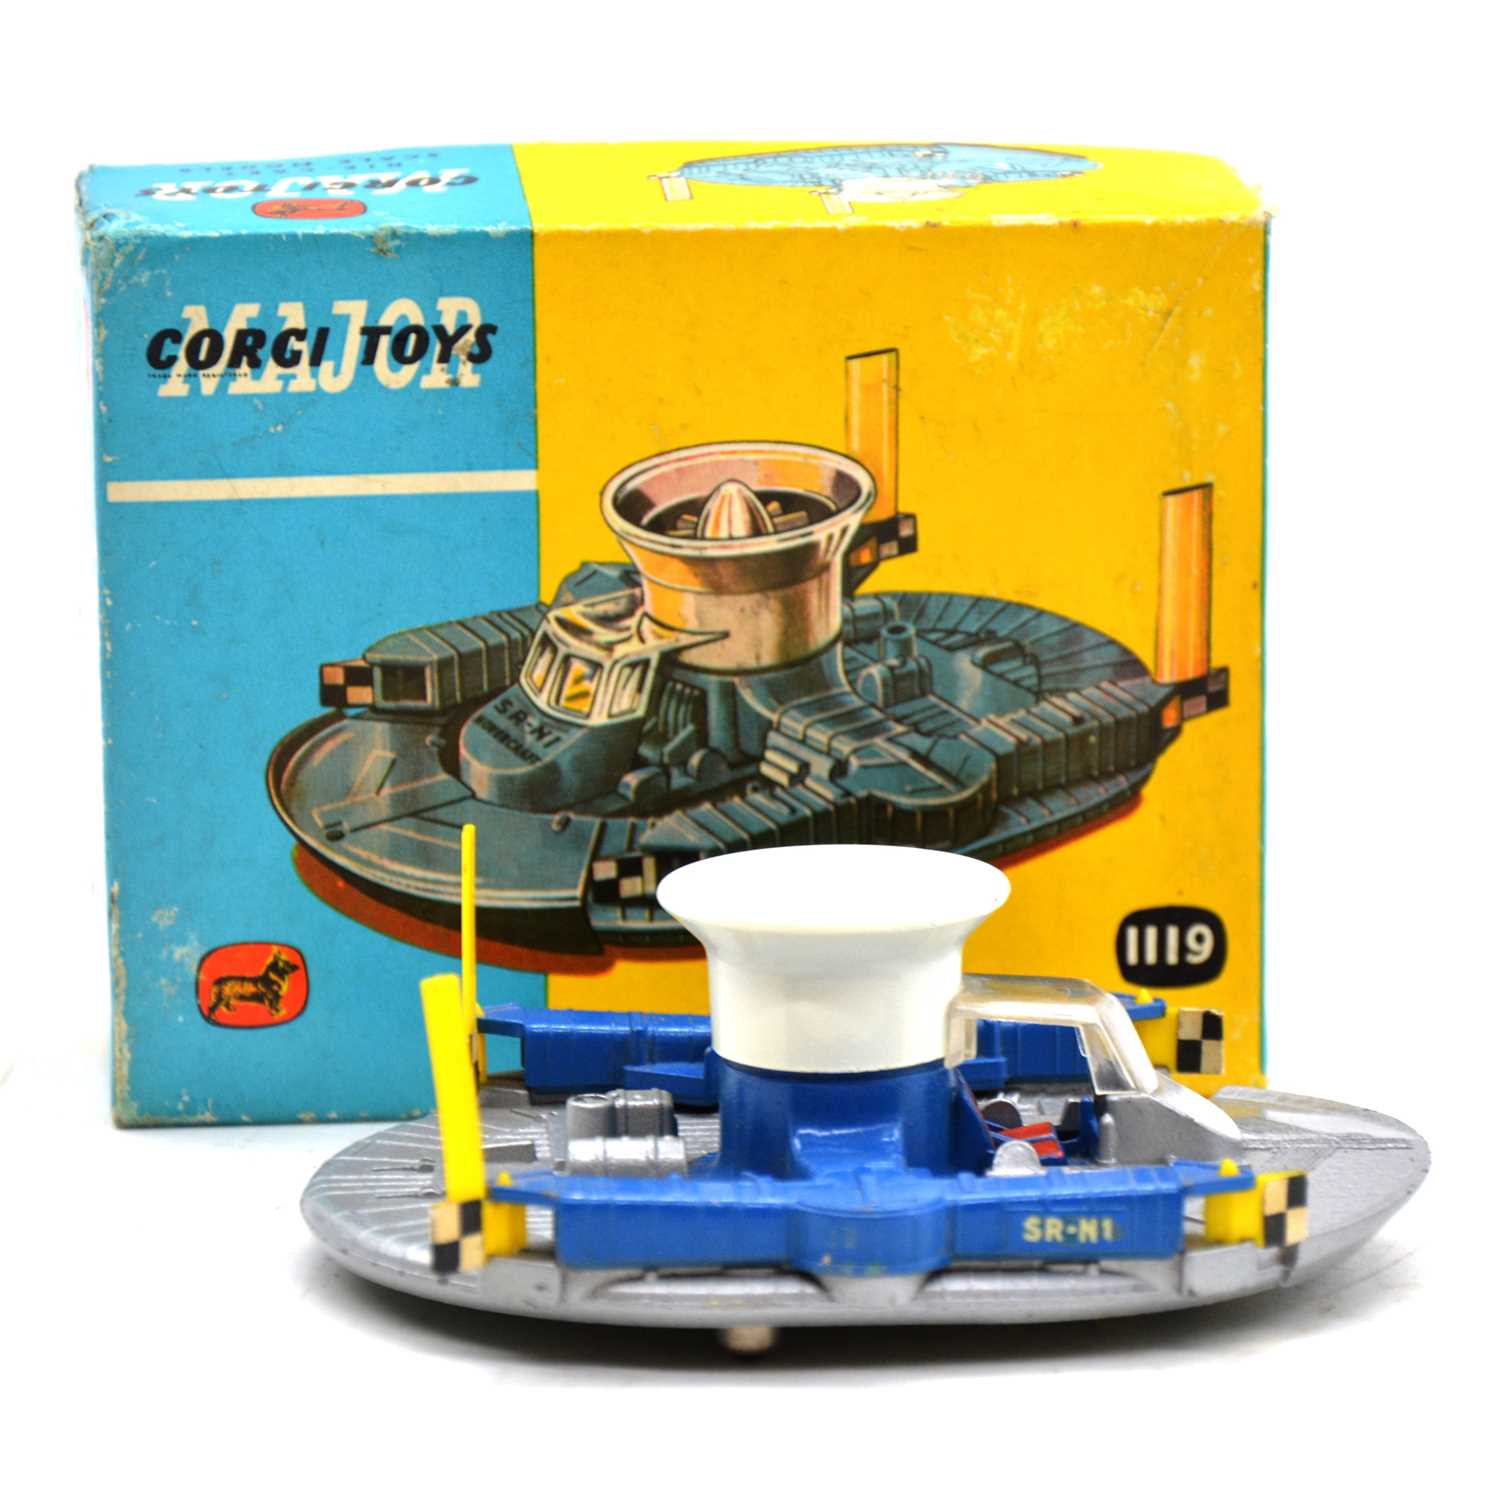 Corgi die-cast model vehicle, ref.1119 HDL Hovercraft, silver and blue, boxed - Image 2 of 2